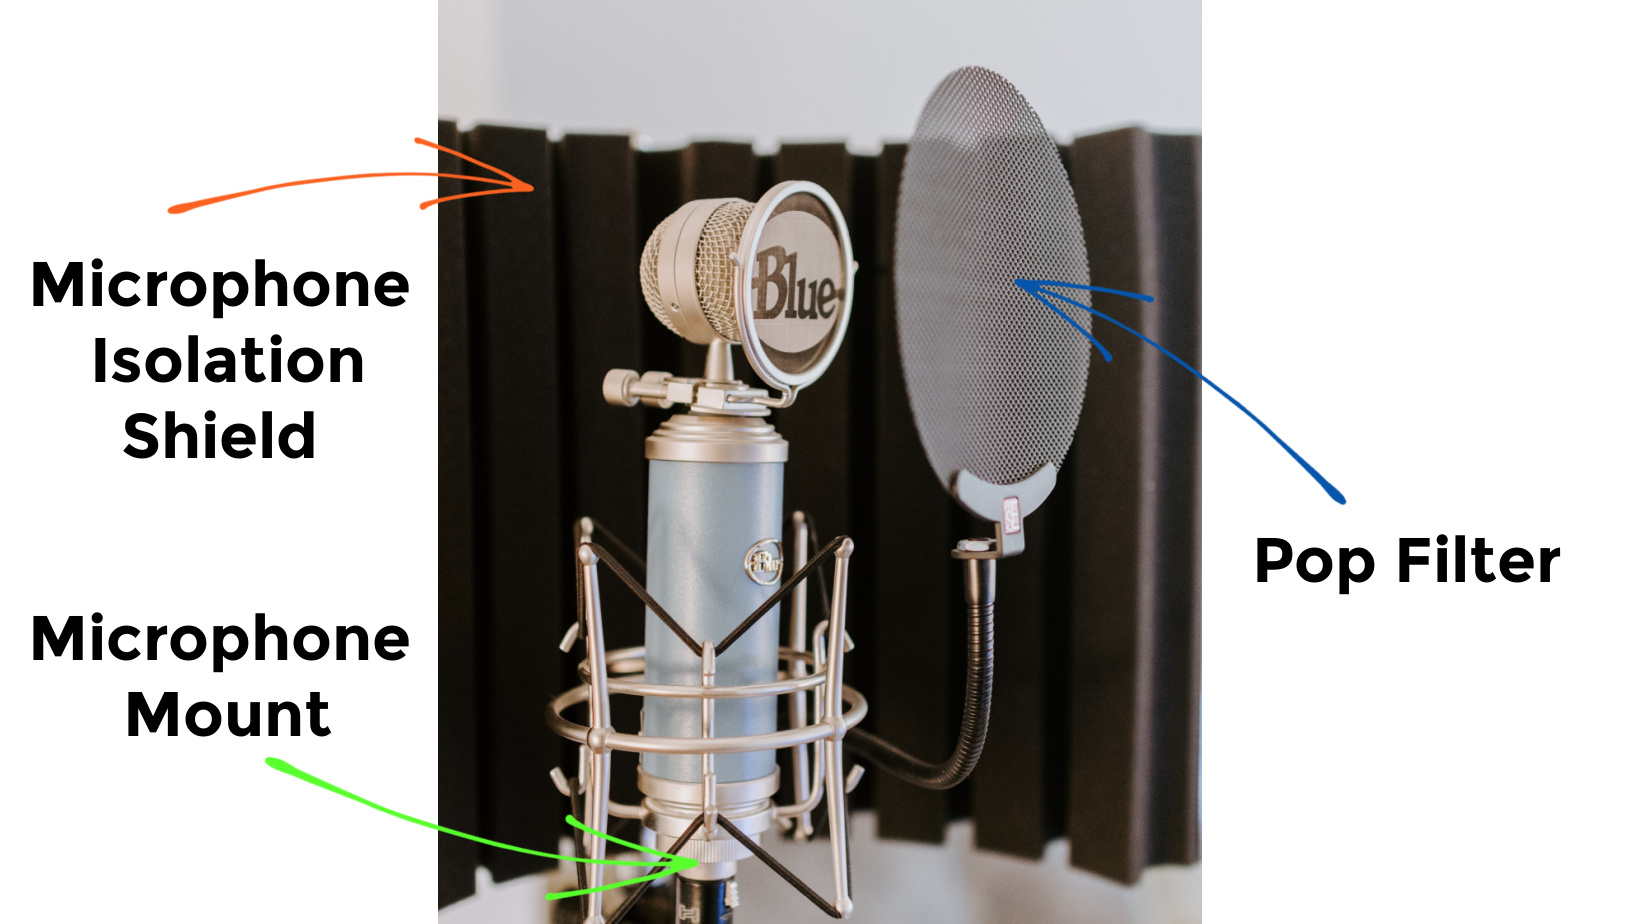 Microphone Isolation Shield, pop filter and microphone mount